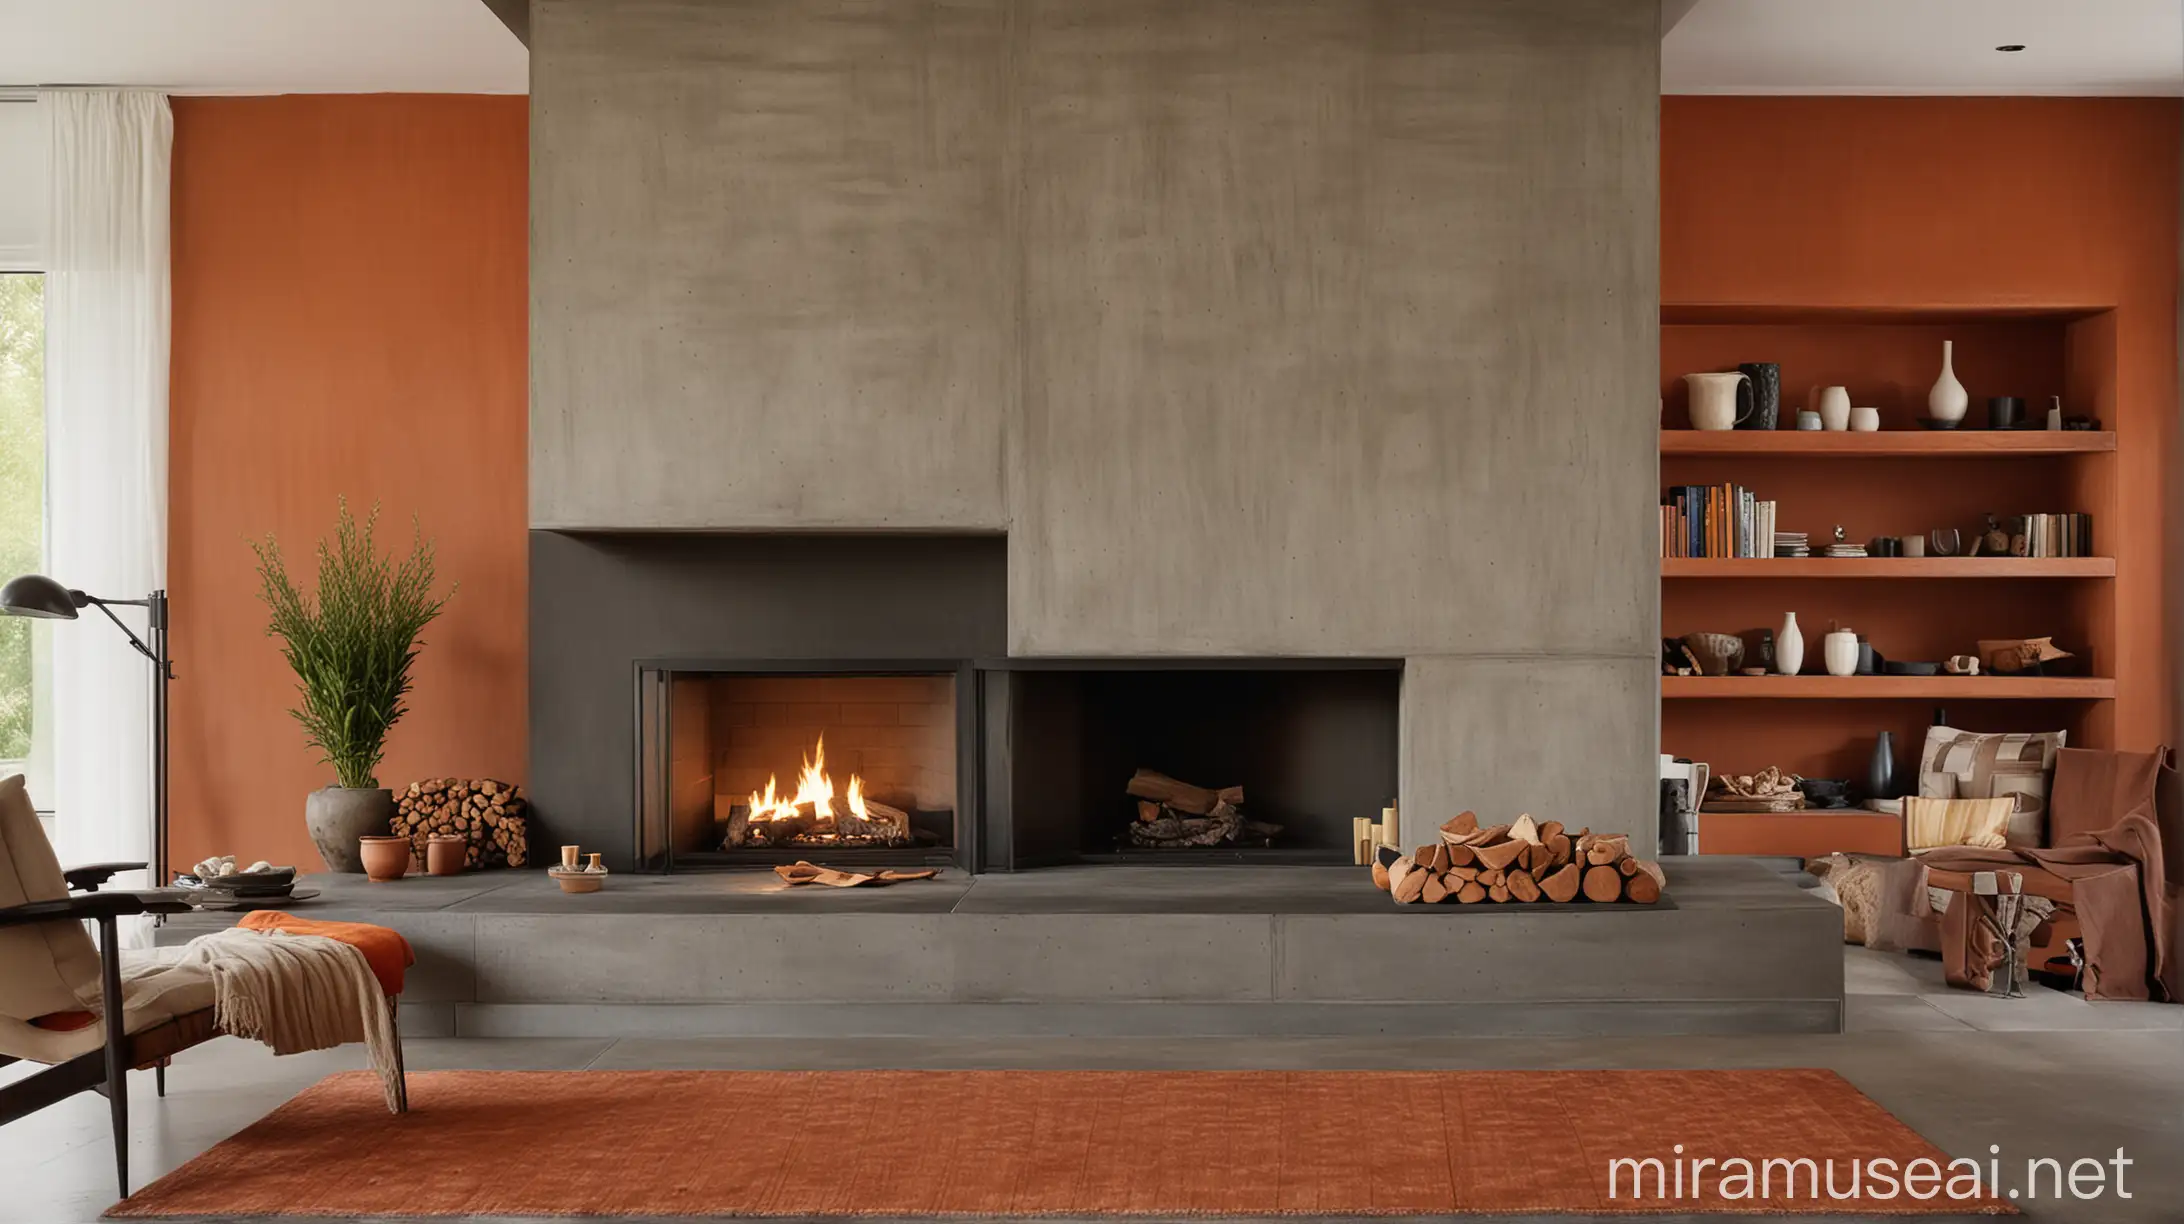 a modern fireplace with a floating hearth made of wood and concrete. The fireplace is the focal point of the room, with warm, inviting colors like terracotta and burnt orange. The camera angle is slightly tilted, looking up at the hearth, emphasizing its unique design.